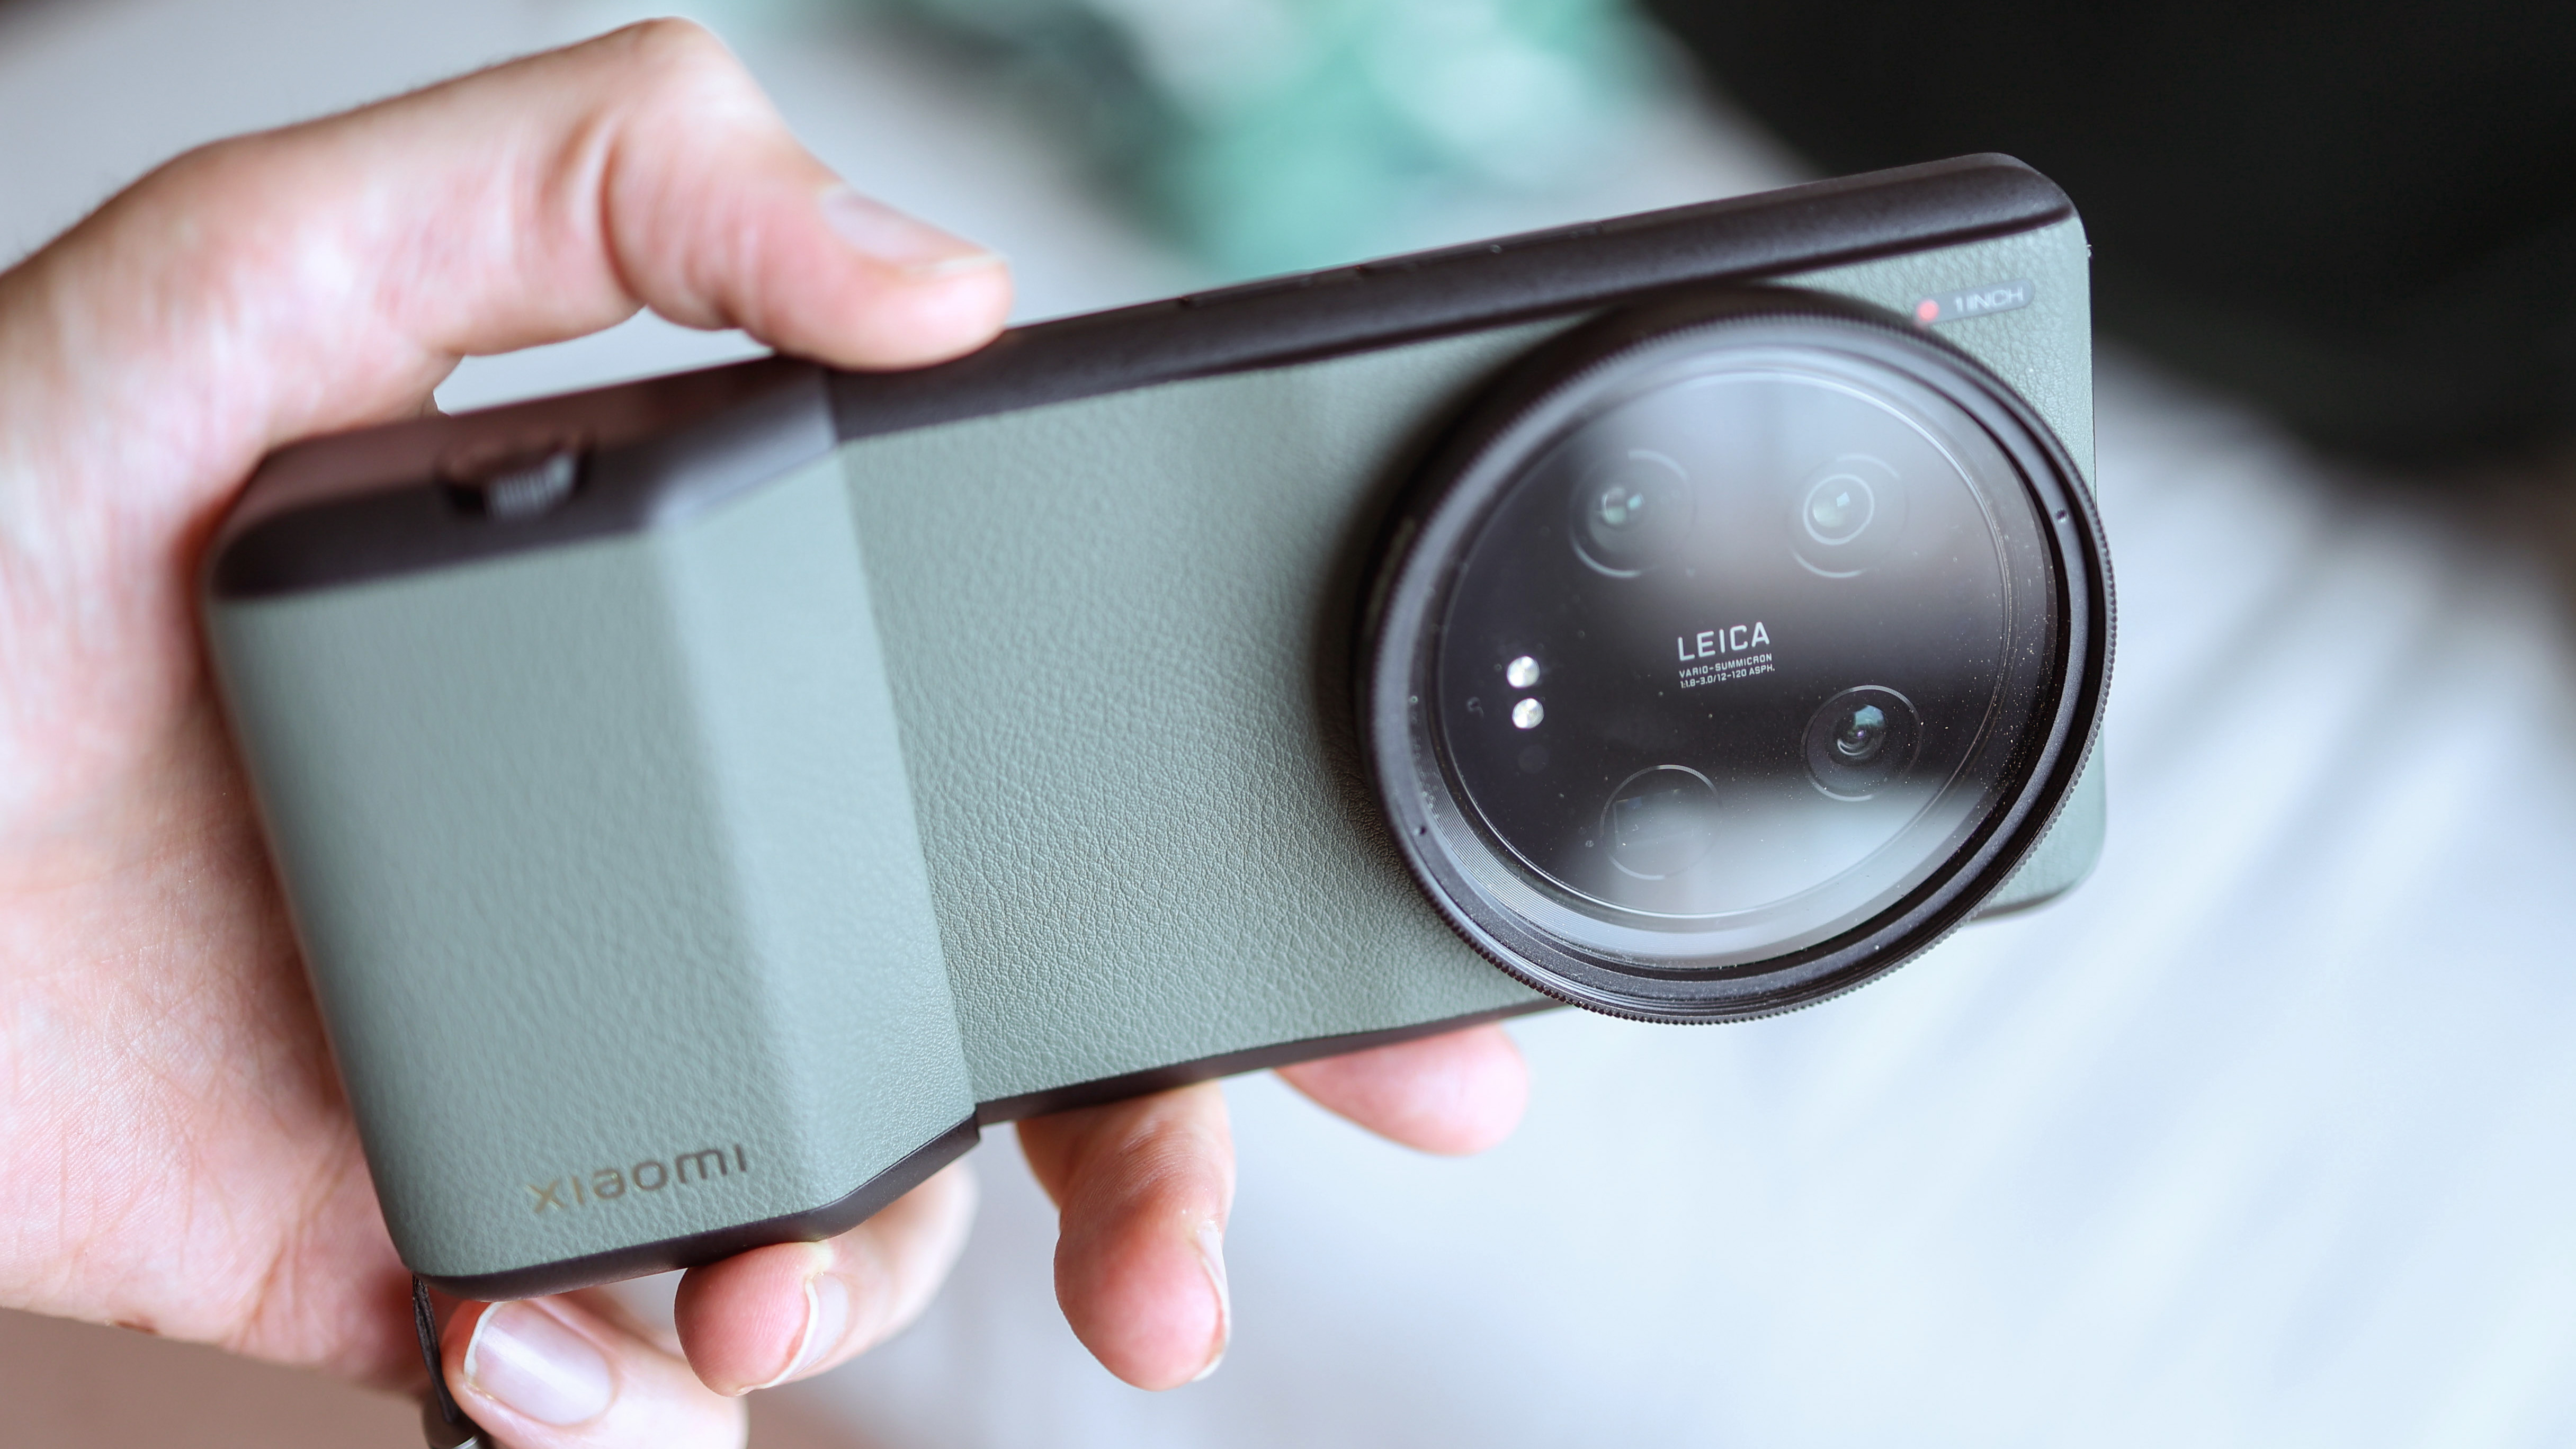 The Xiaomi 12S Ultra offers an incredible camera with a 1-inch